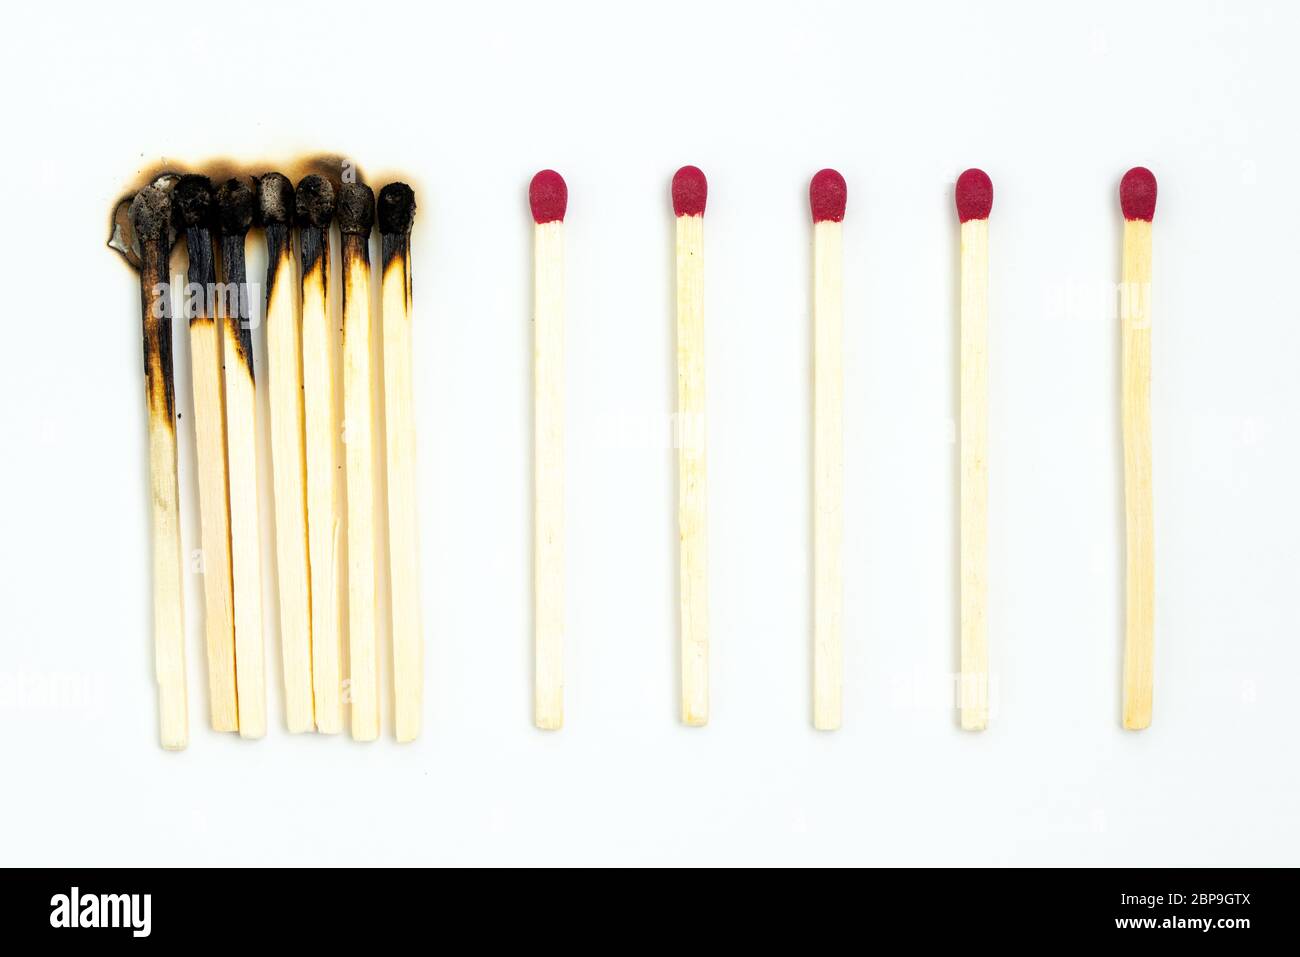 Social distancing concept using burnt out match sticks Stock Photo